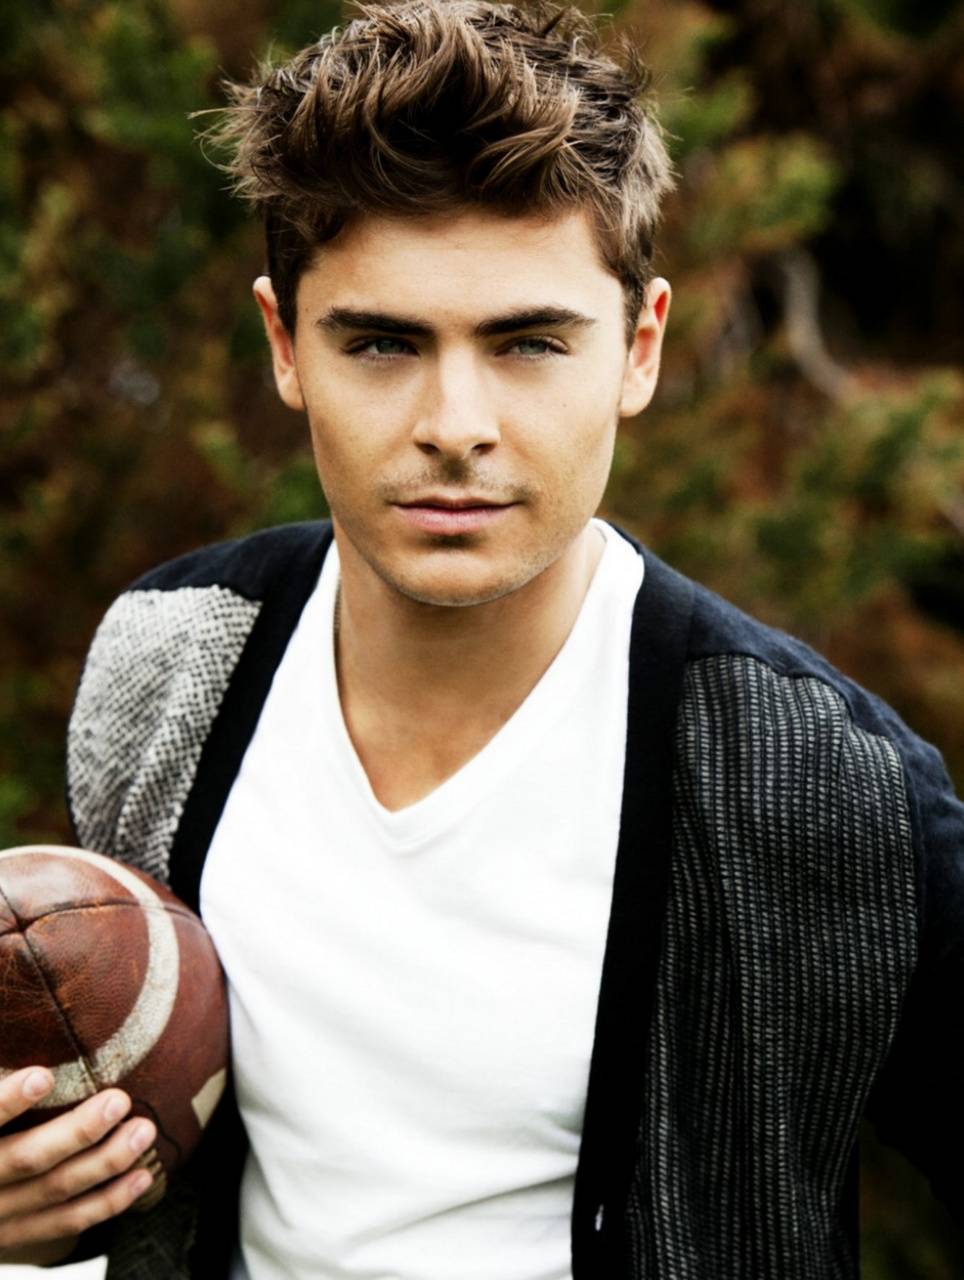 Zac Efron Wallpaper by TheLightSource on DeviantArt